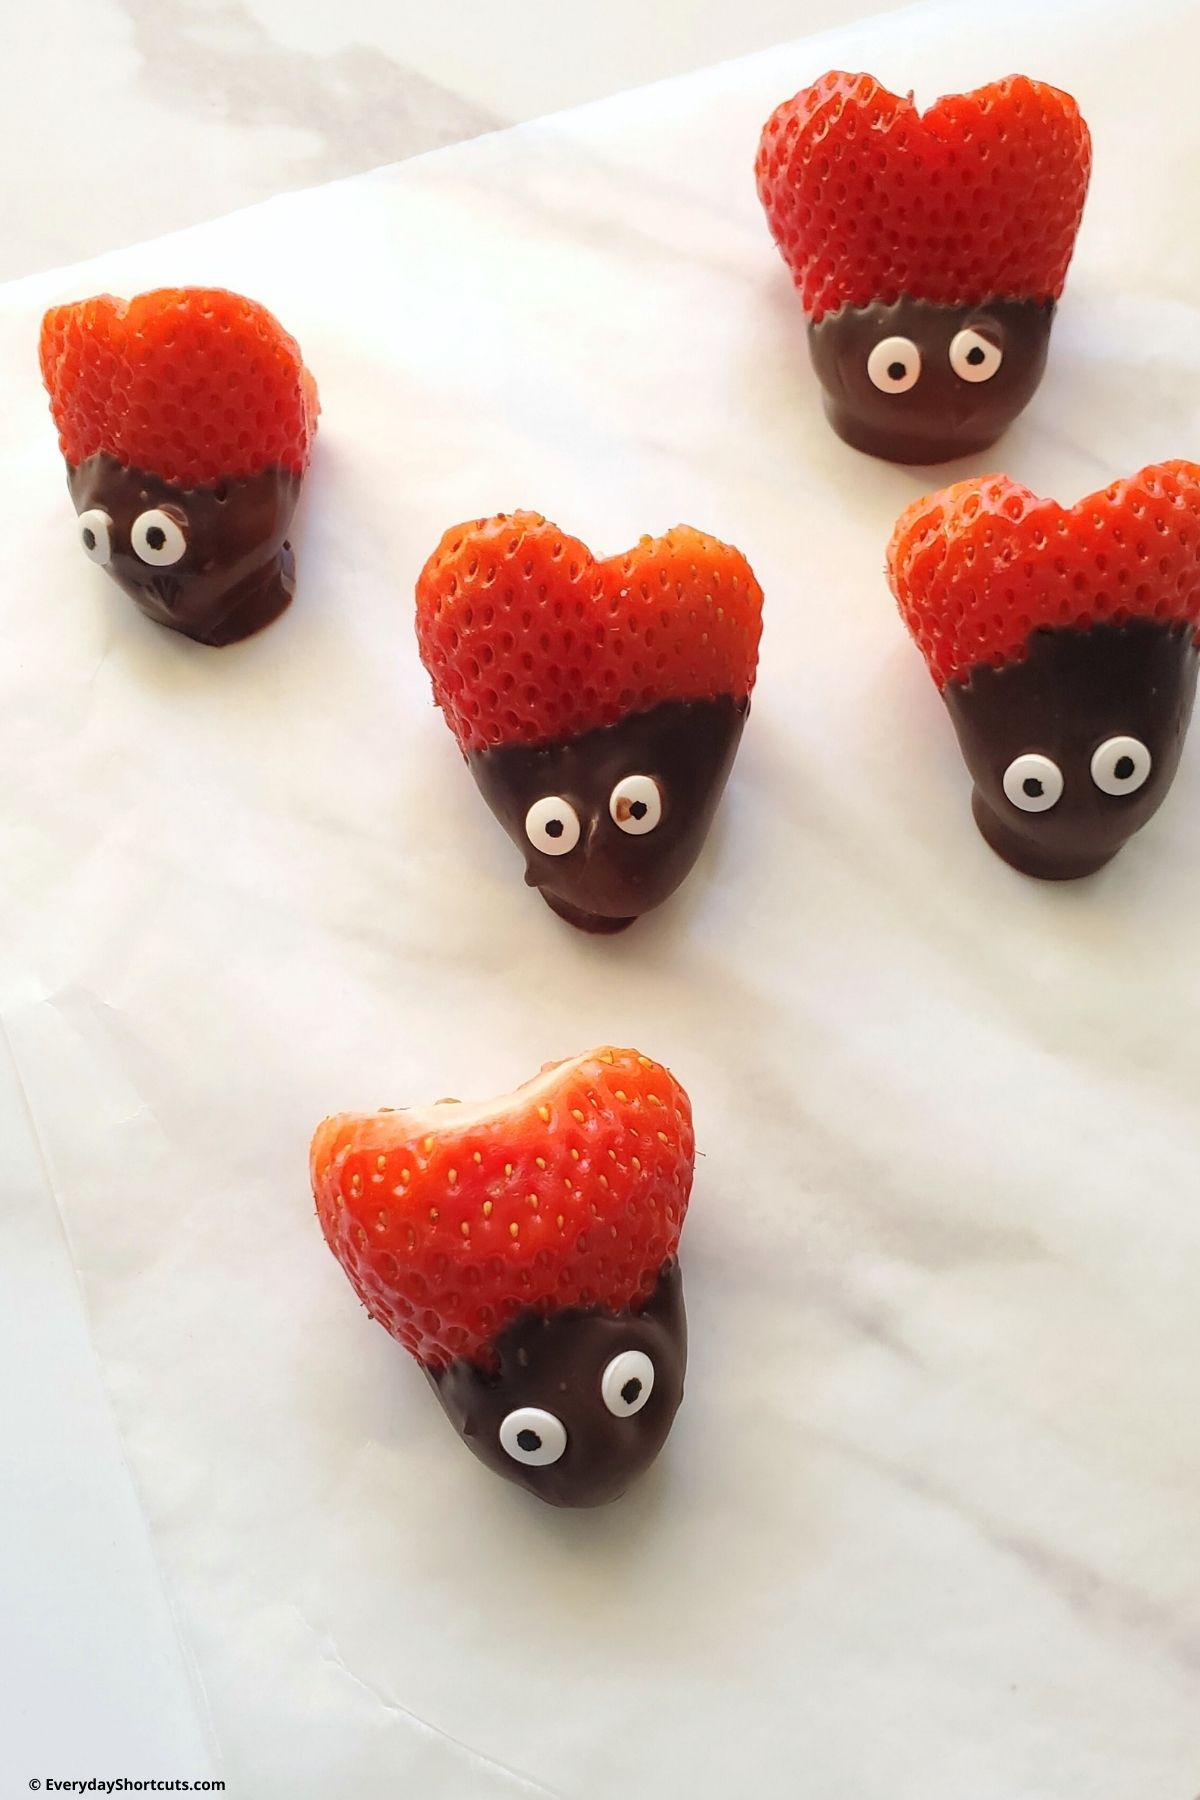 strawberries with chocolate dipped on one end and candy eyes